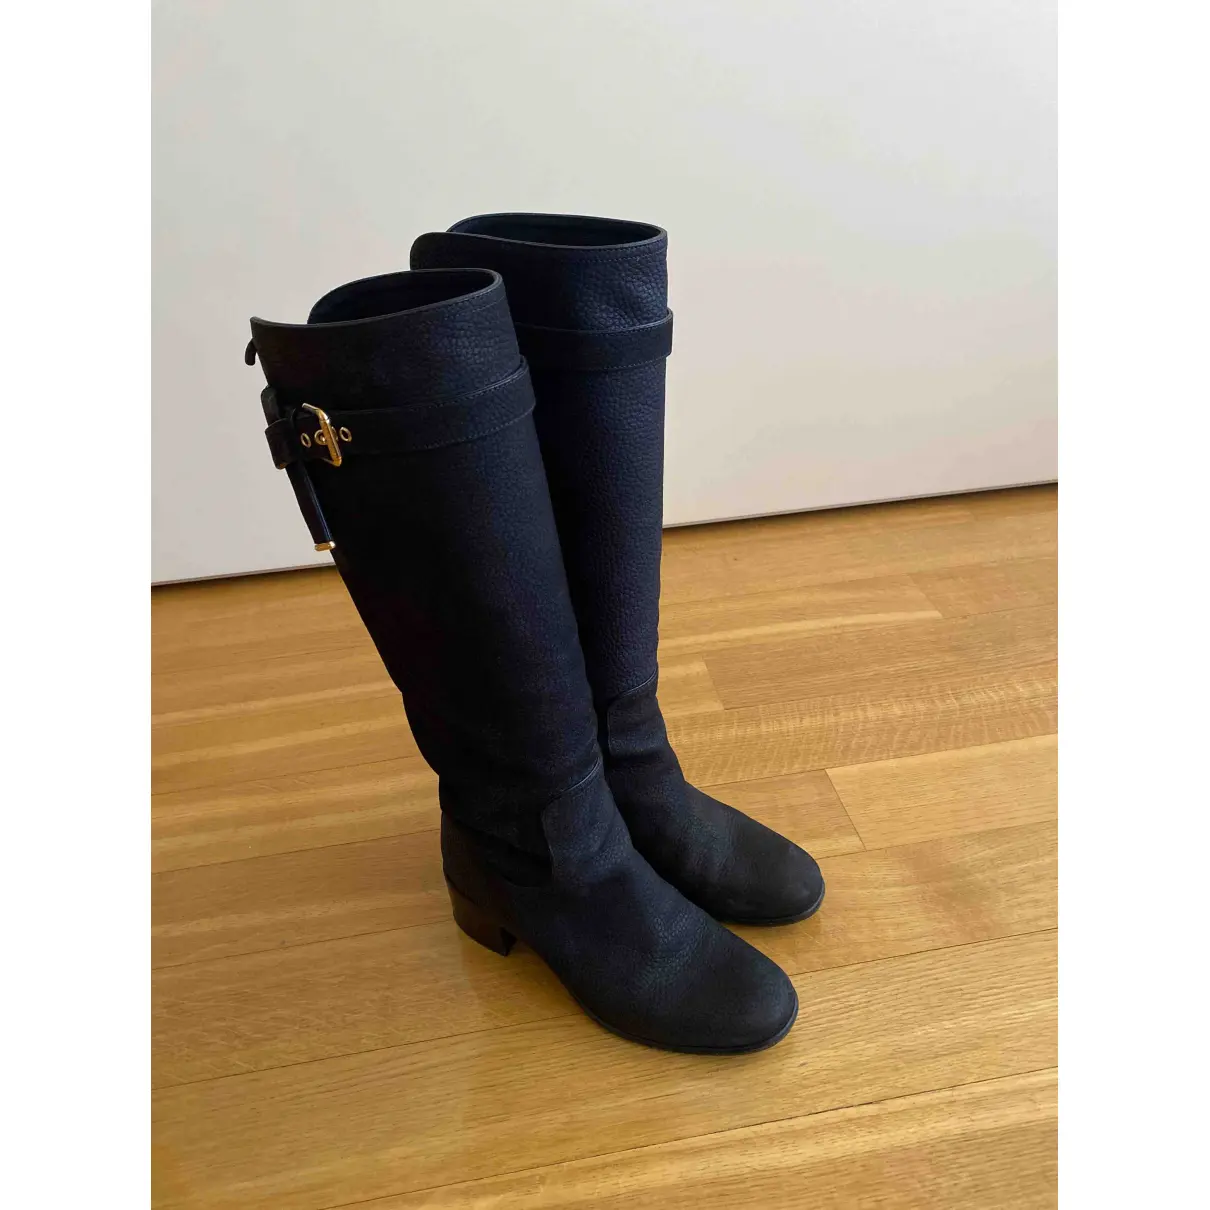 Buy Louis Vuitton Leather riding boots online